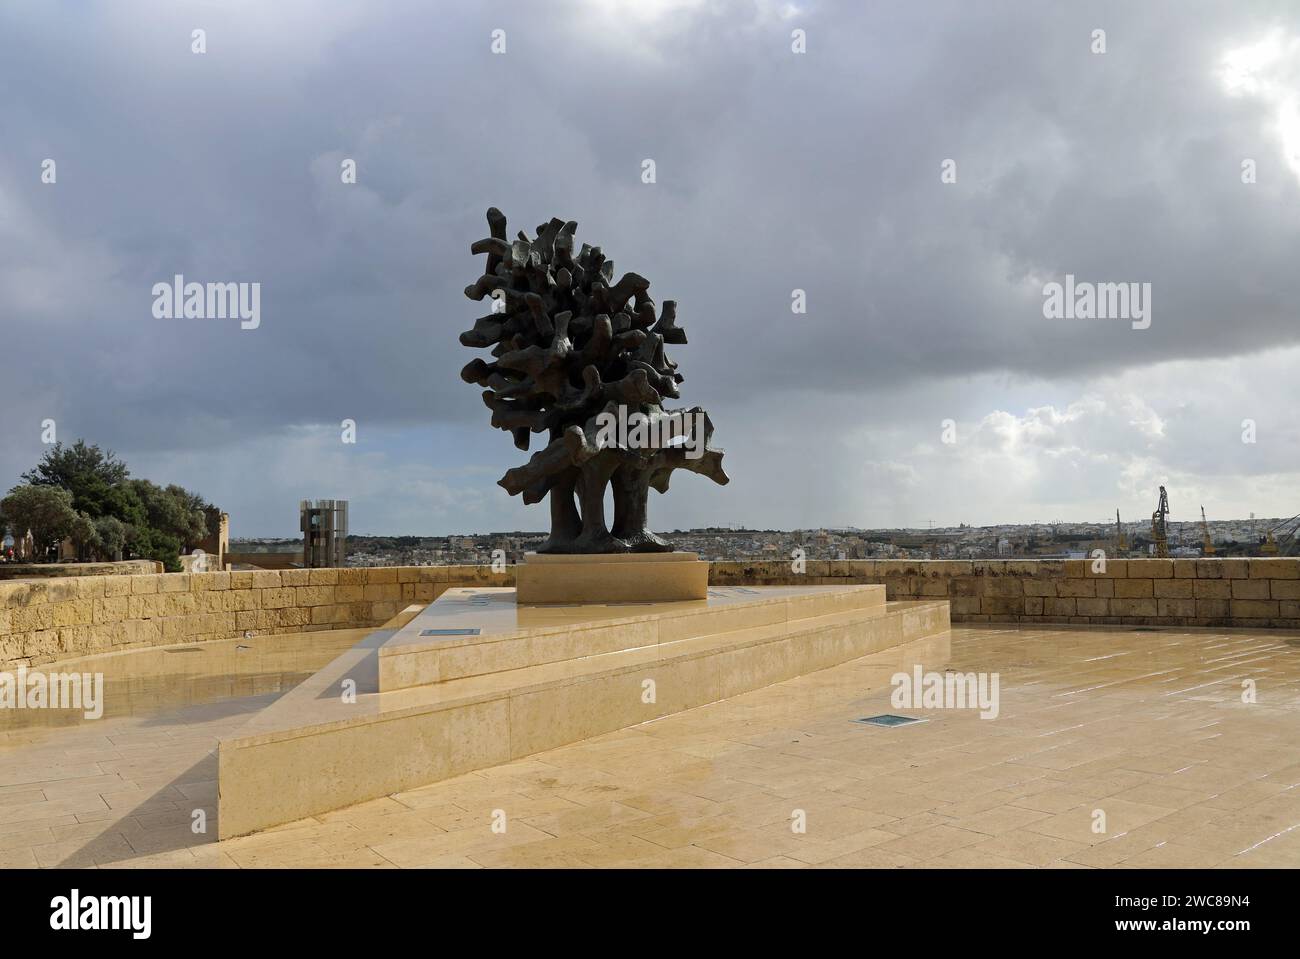 A Flame That Never Dies artwork by Valerio Schembri in Valletta which celebrates the Maltese people Stock Photo